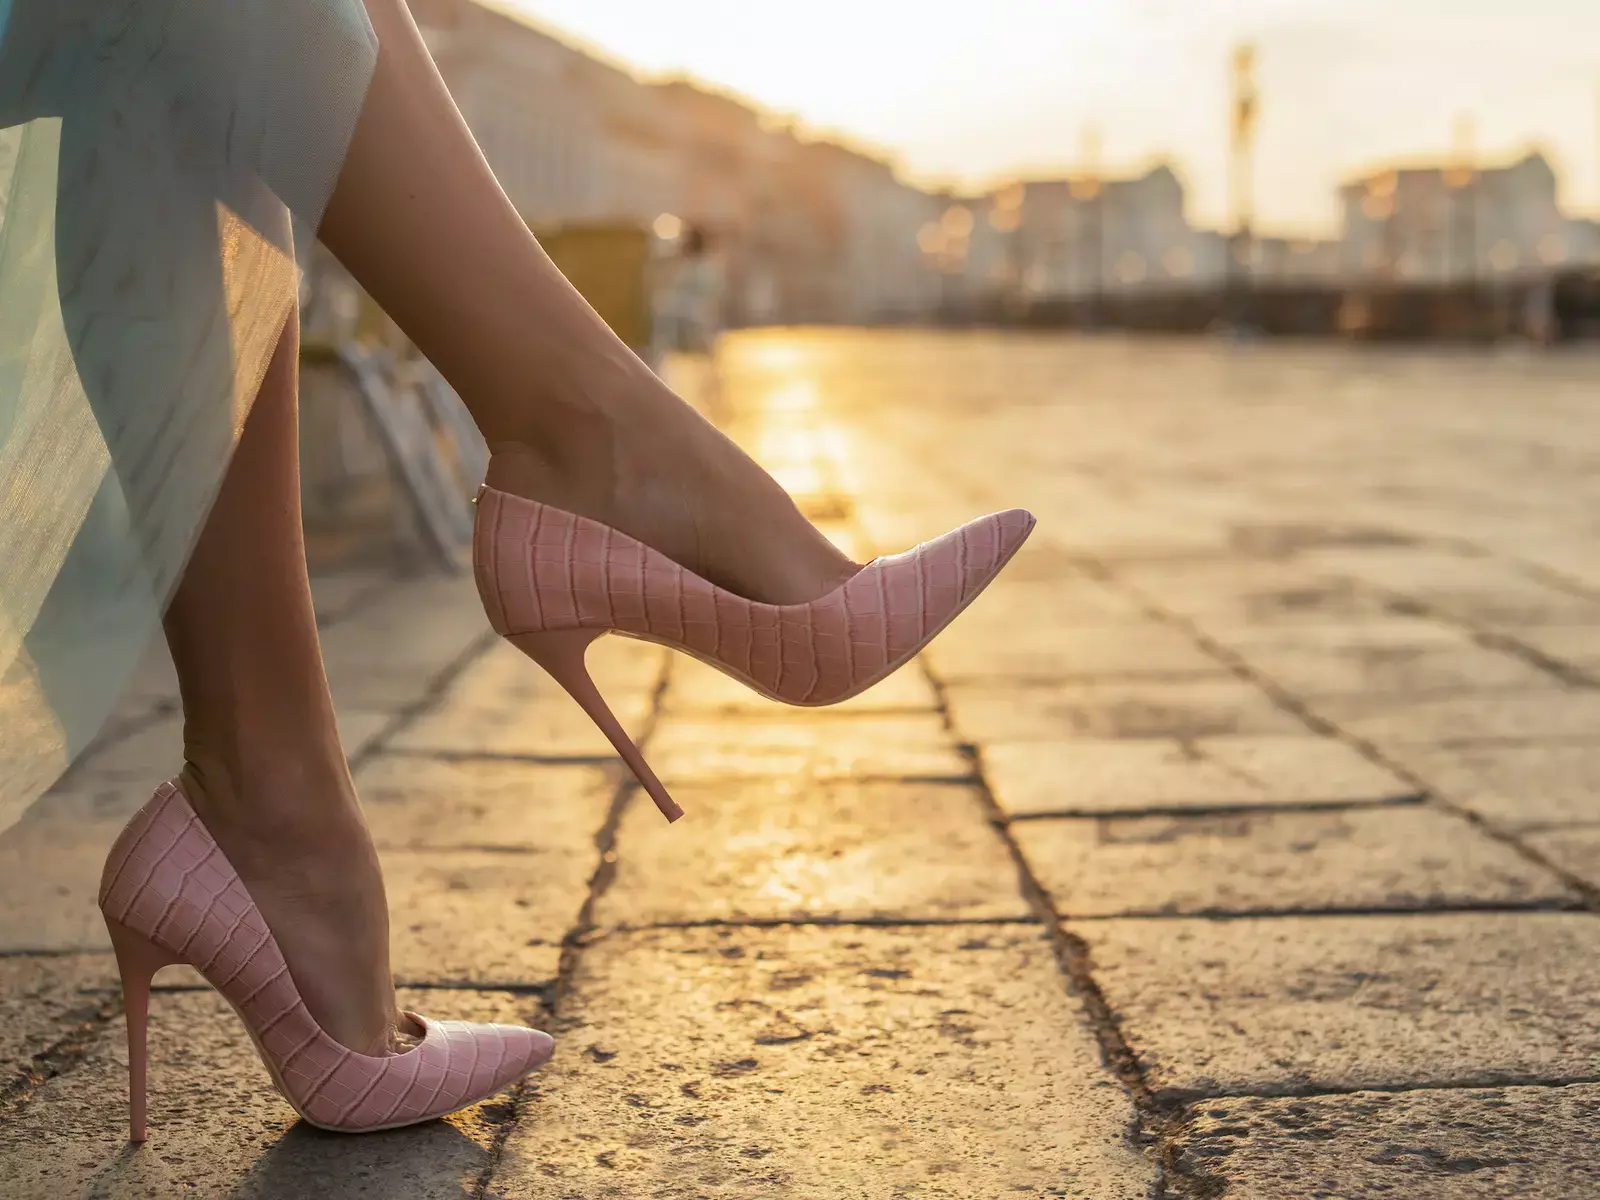 High heels in the workplace: Why do women have to wear high heels